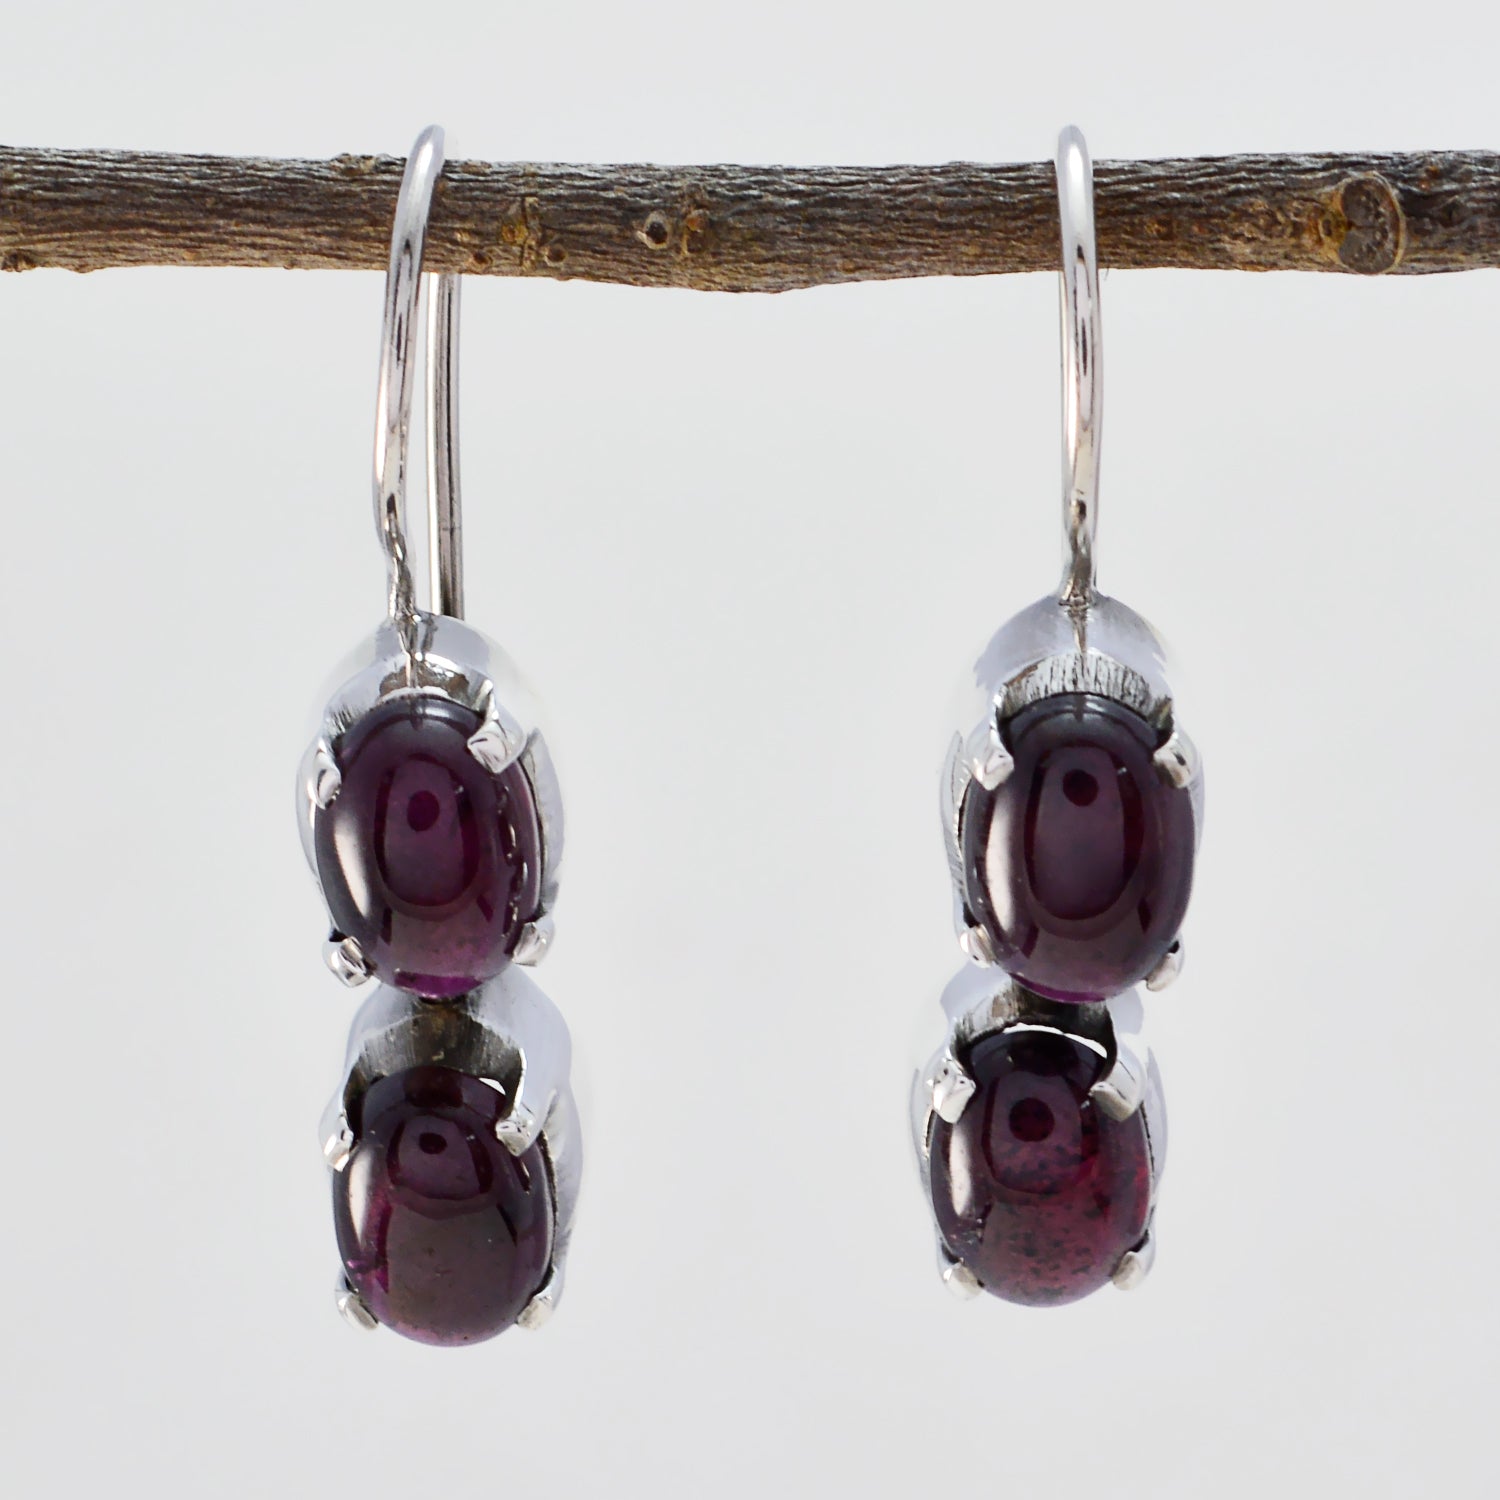 Riyo Real Gemstones oval Cabochon Red Garnet Silver Earrings gift for daughter's day